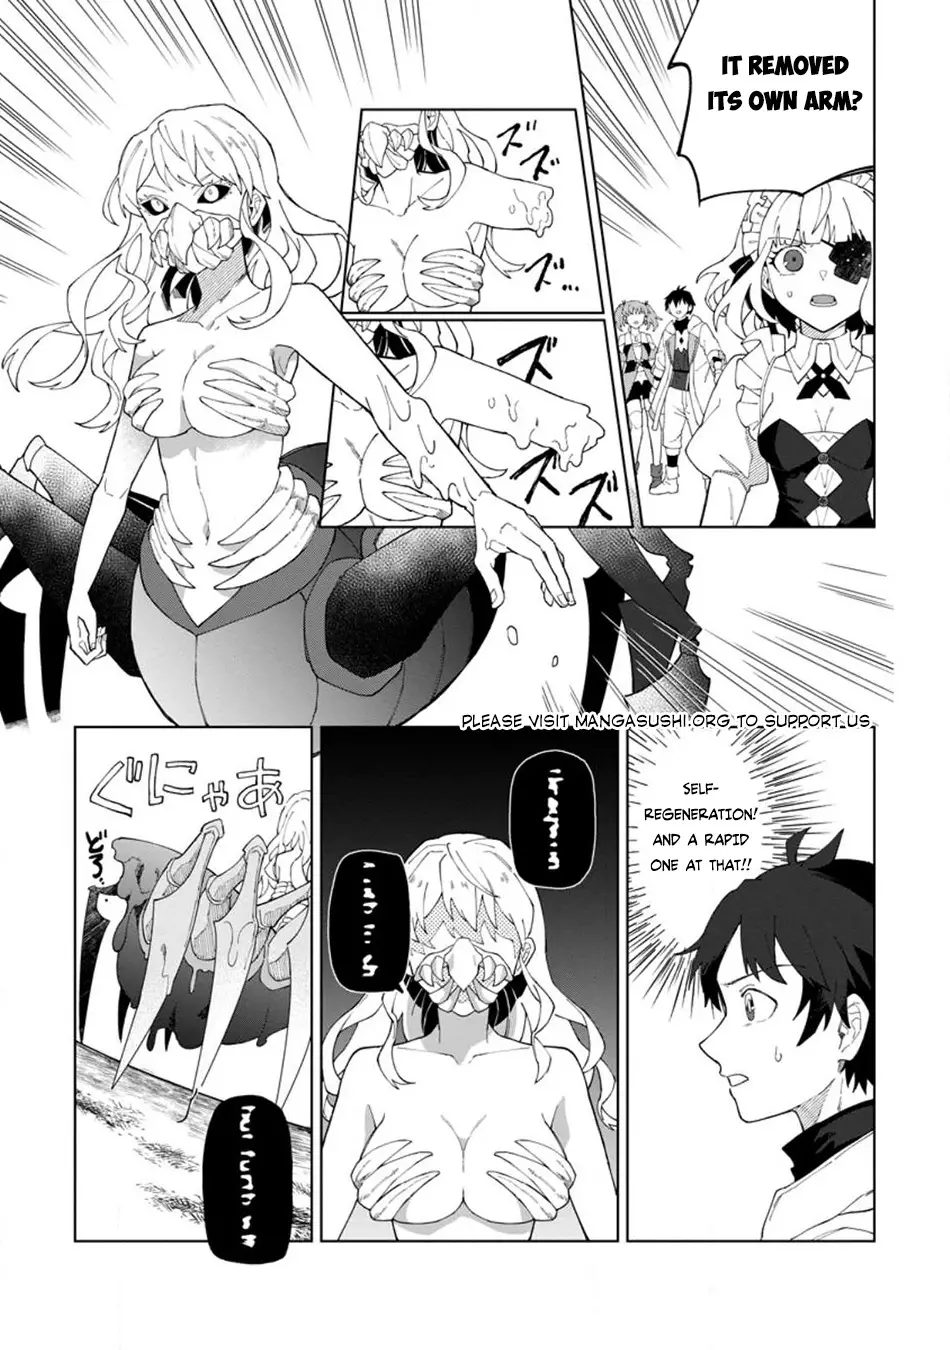 The White Mage Who Was Banished From The Hero's Party Is Picked Up By An S Rank Adventurer~ This White Mage Is Too Out Of The Ordinary! - 26.1 page 6-32d0dfa6